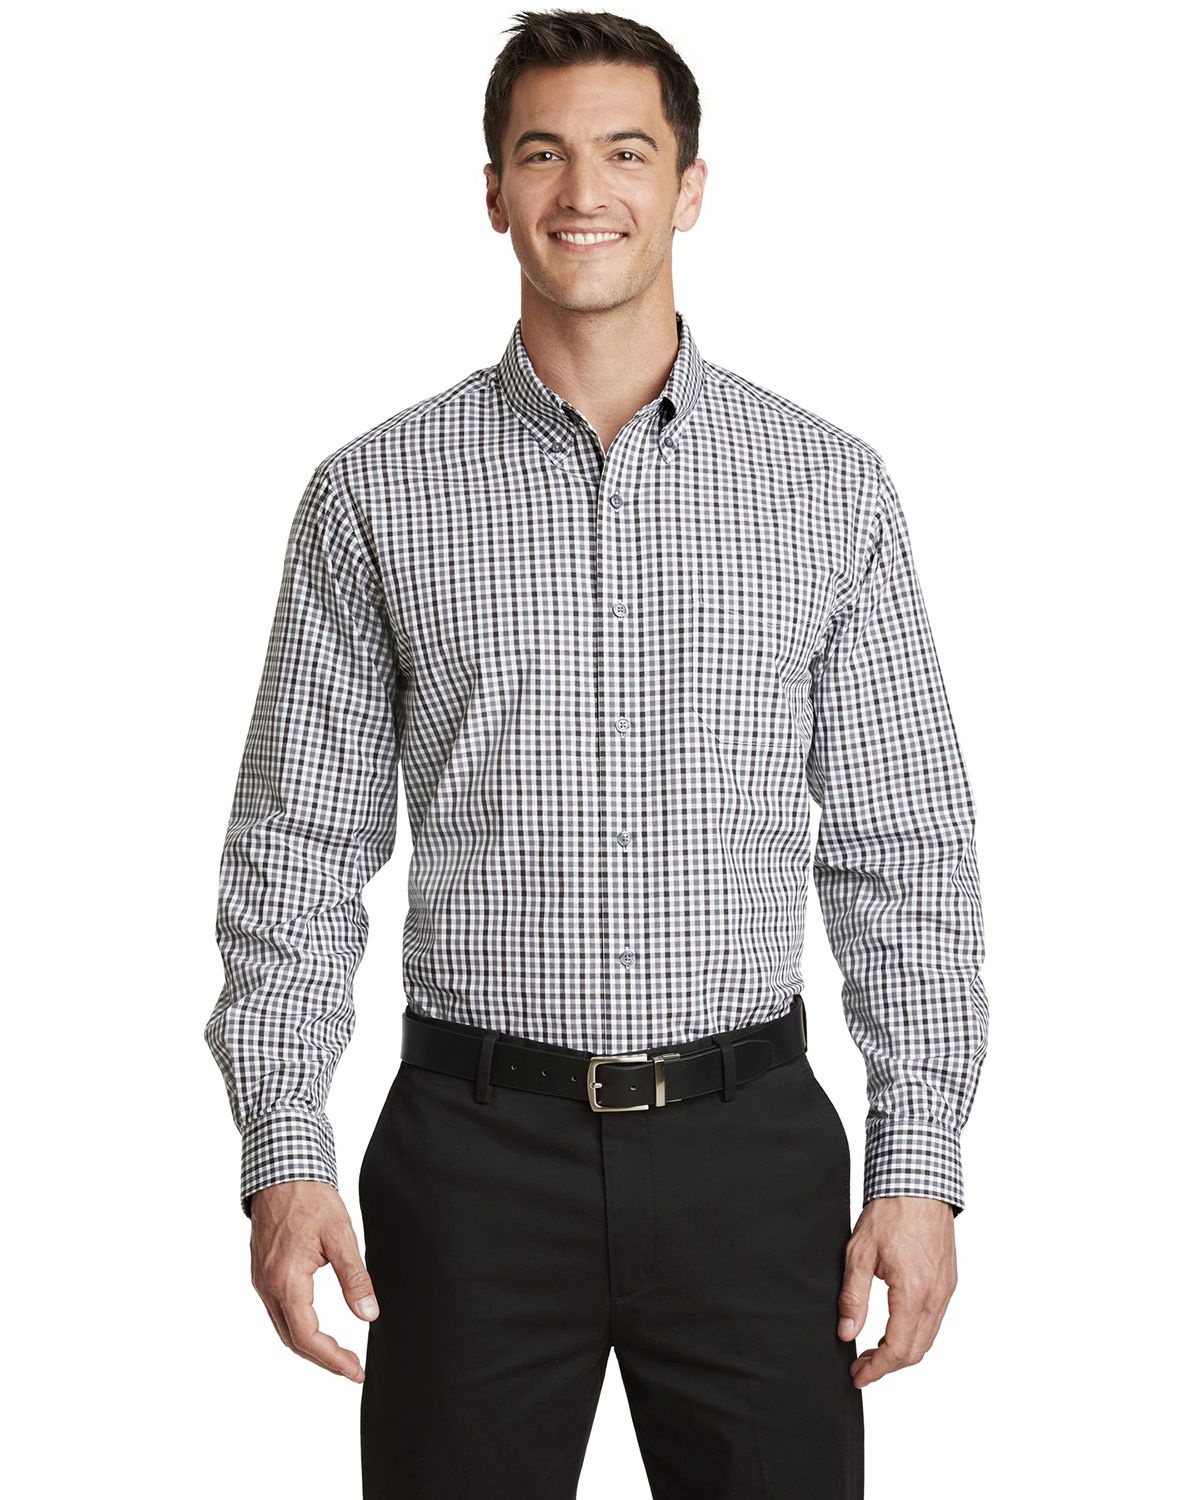 'Port Authority S654 Long Sleeve Gingham Easy Care Shirt'